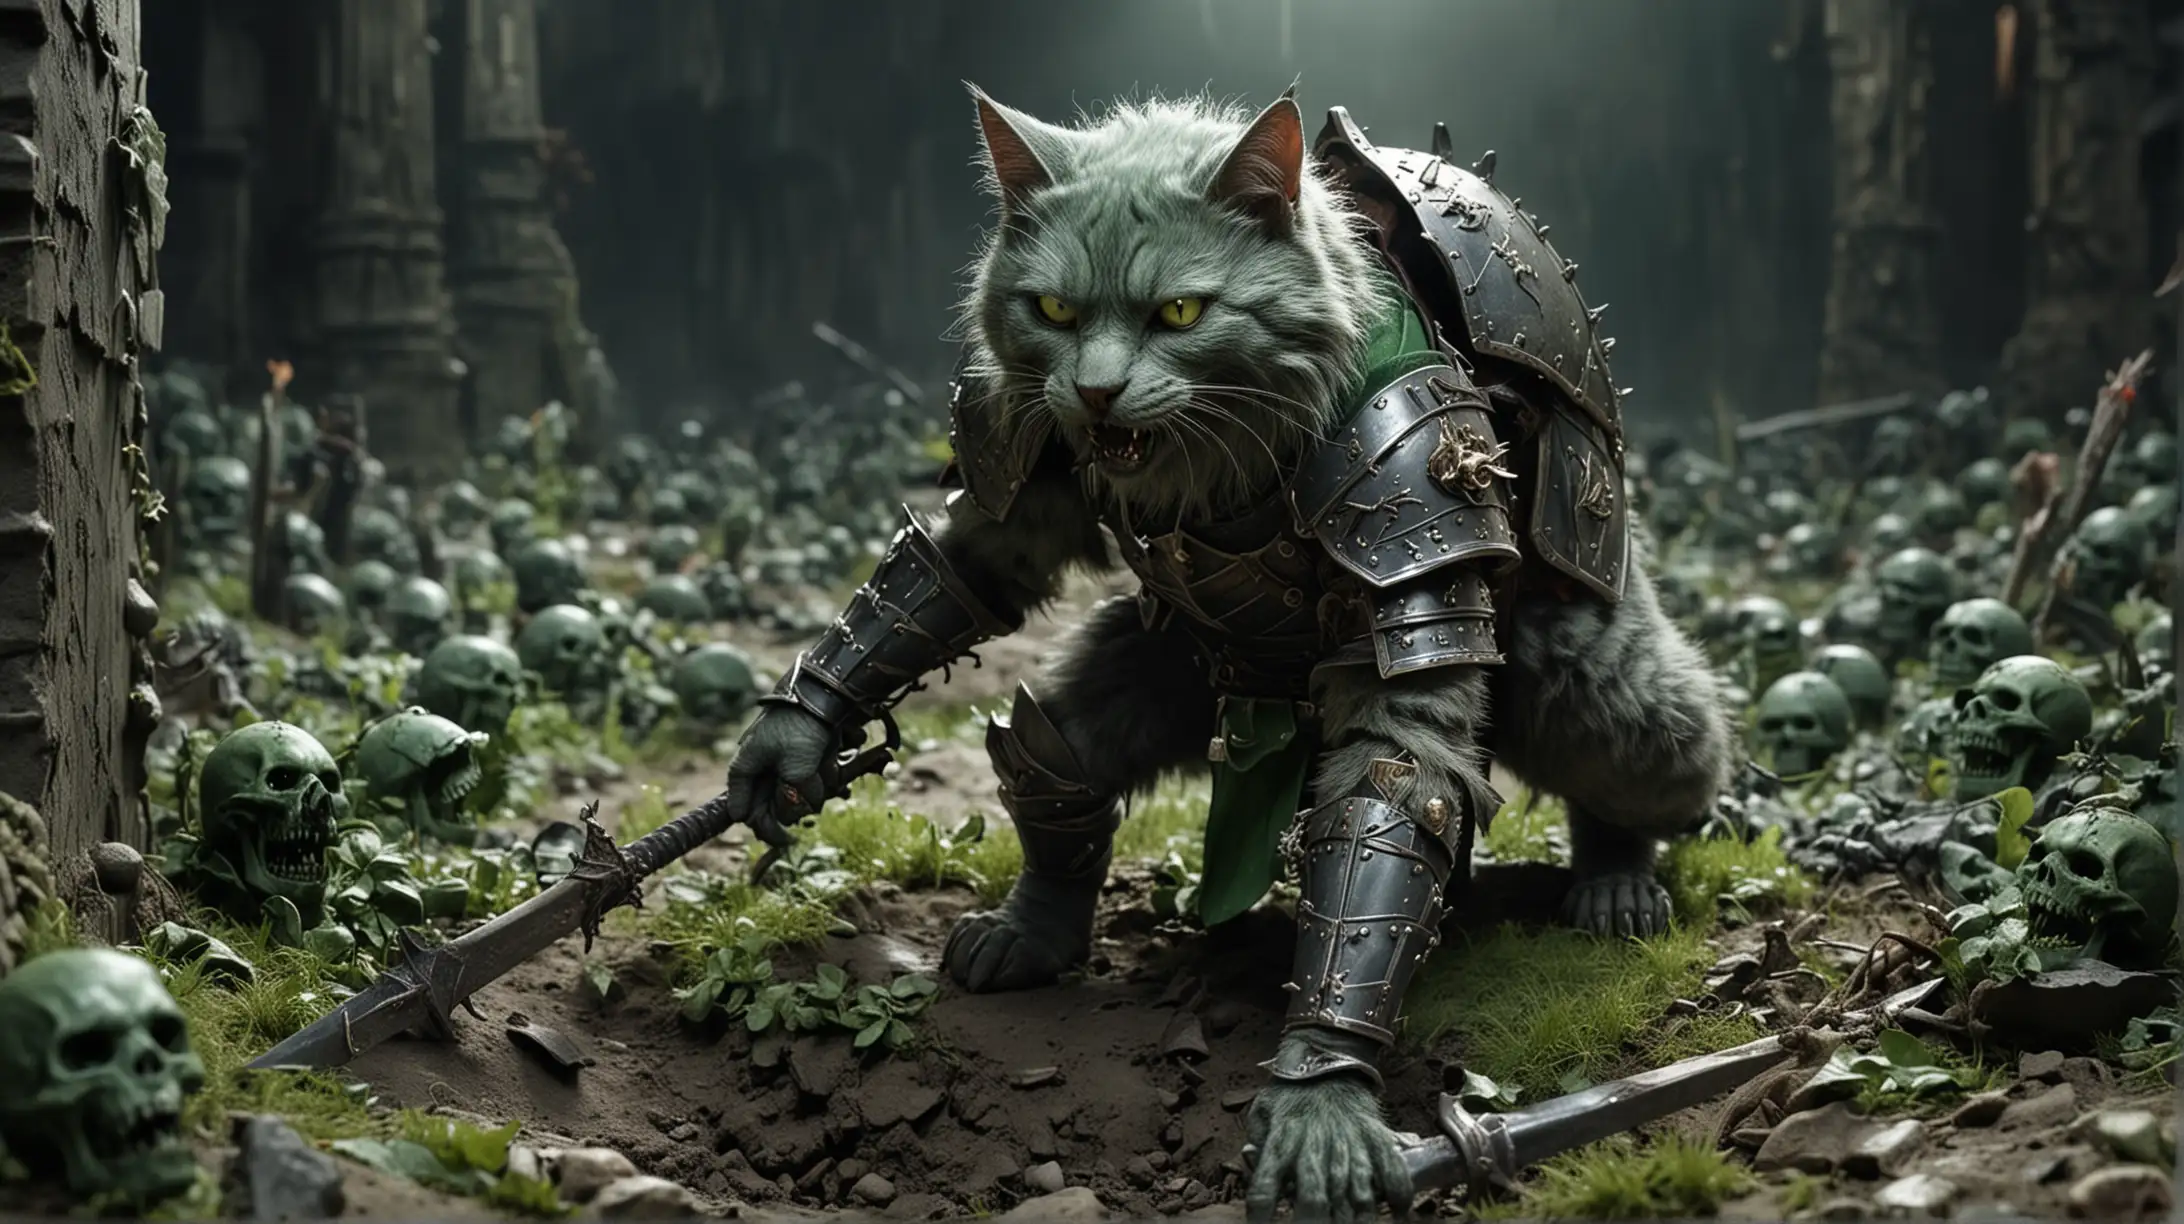 Green Zombie Cat Pulling Wolf Knight to Grave Pit in Medieval Armor